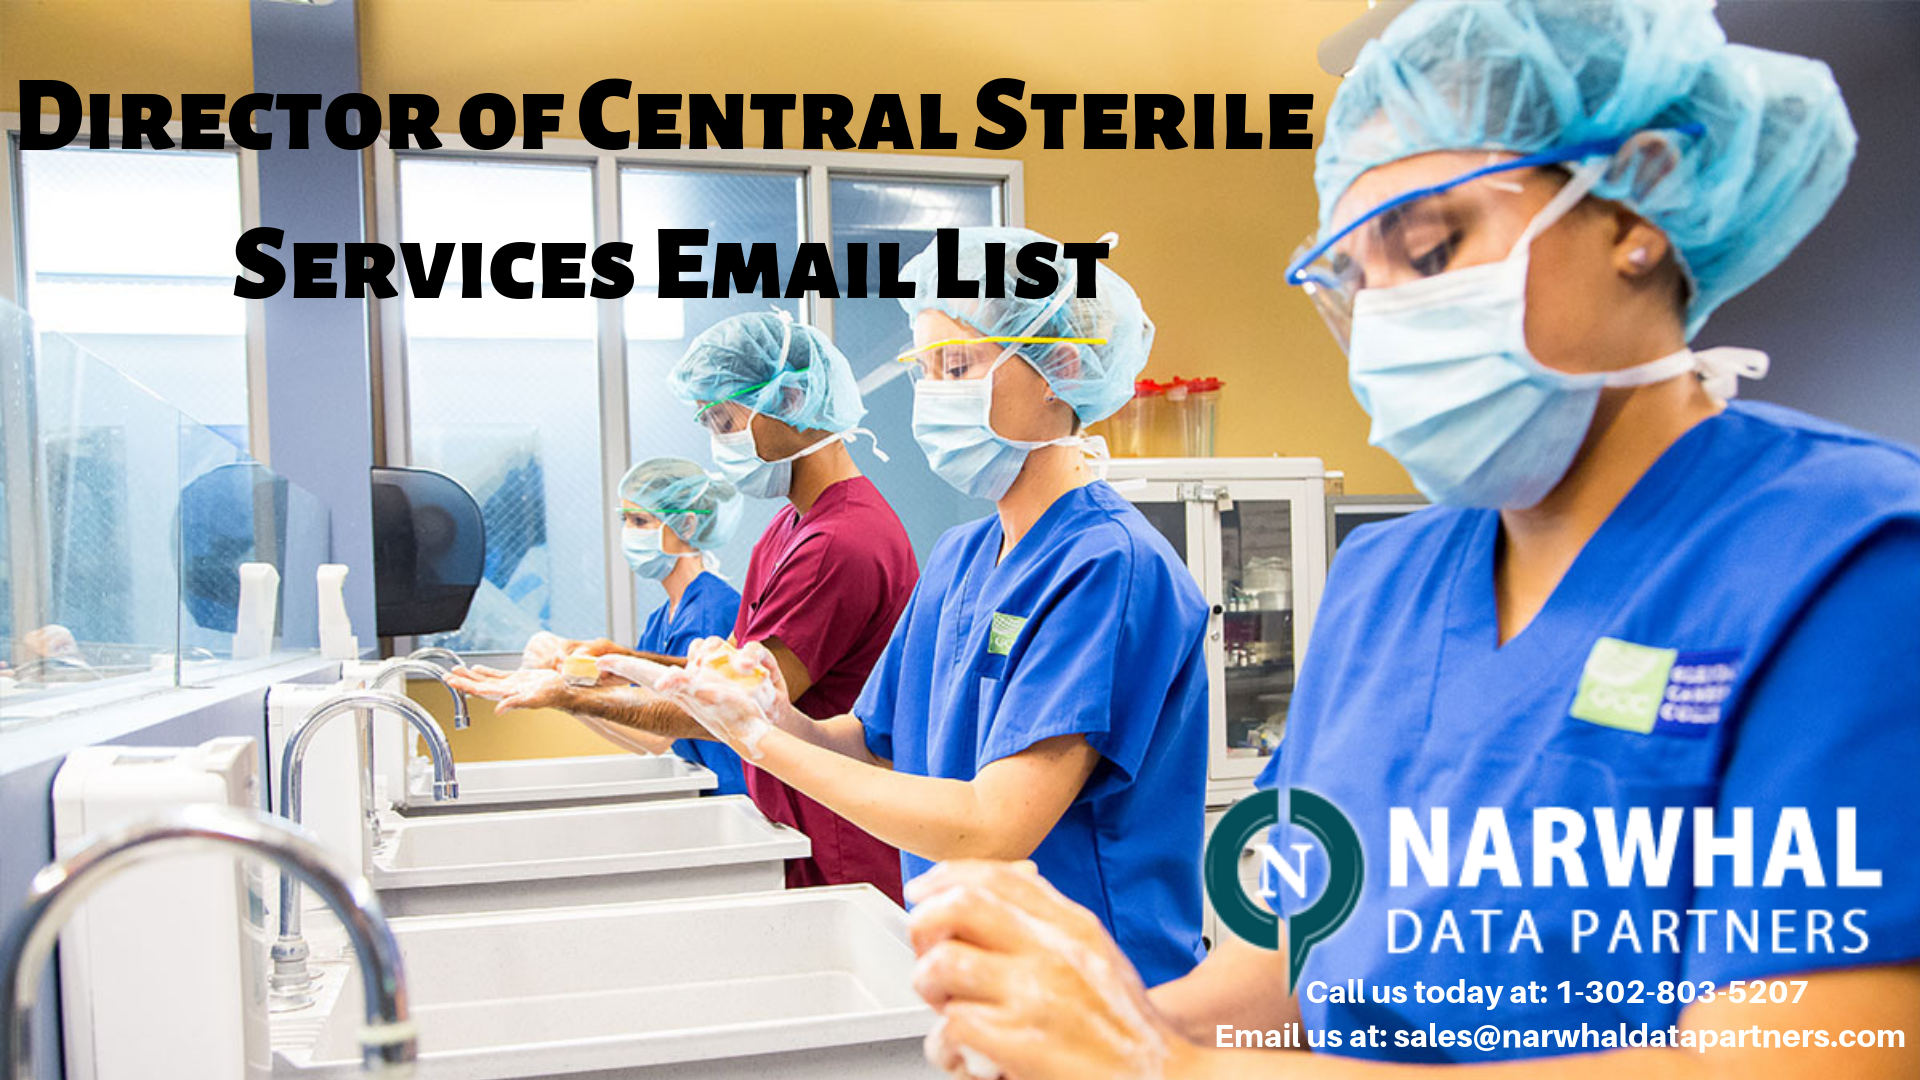 http://narwhaldatapartners.com/director-of-central-sterile-services-email-list.html